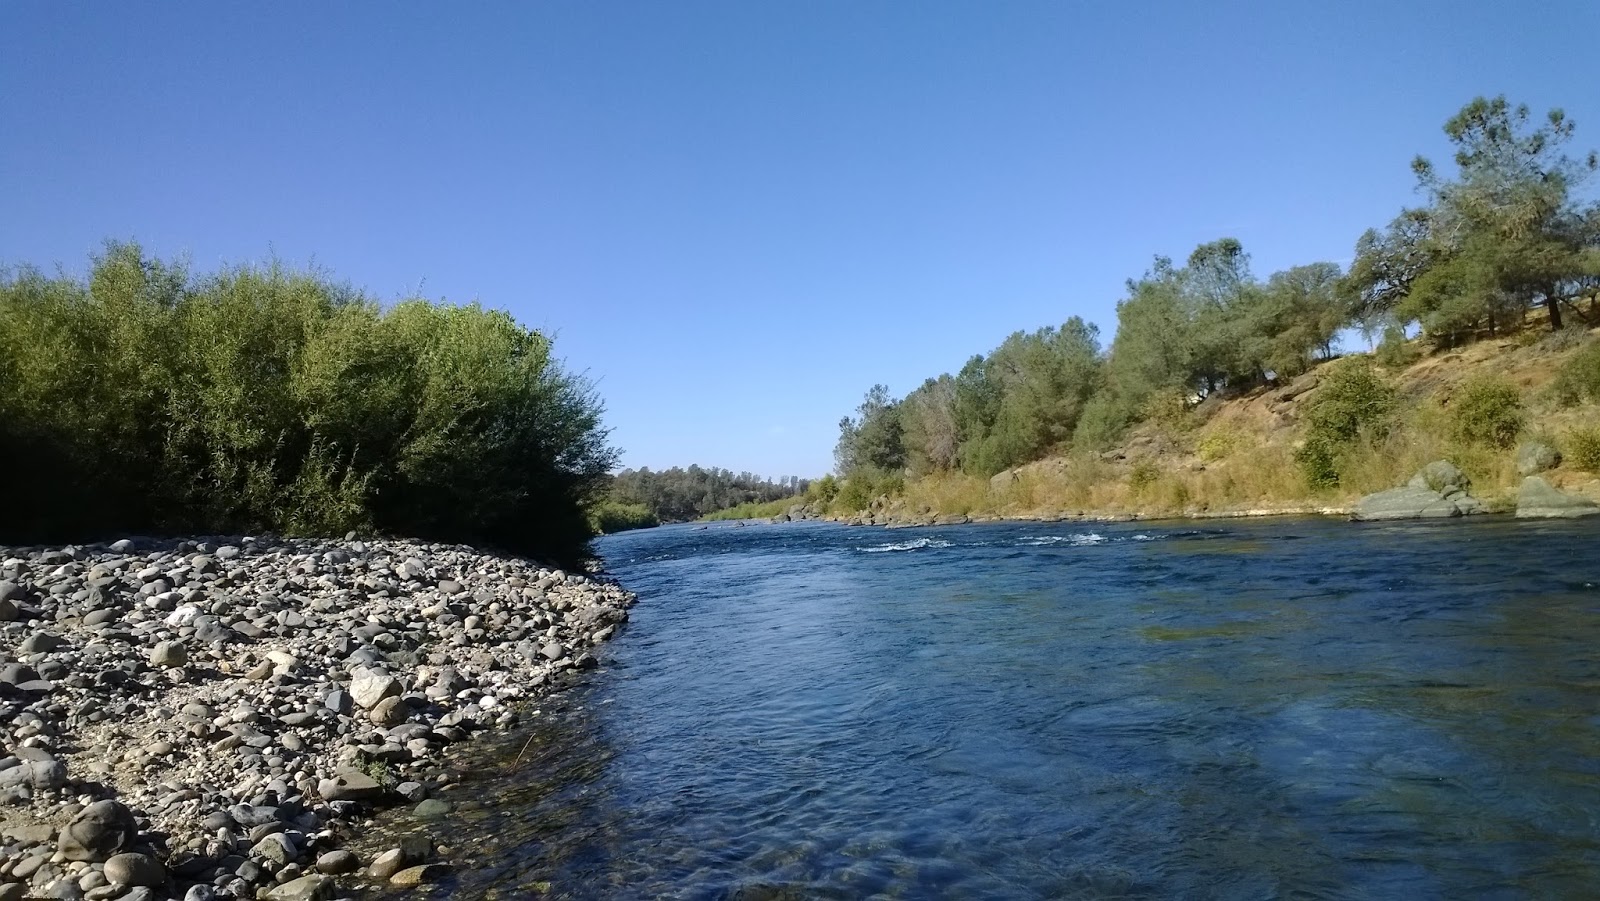 Indian Summer Days On The Yuba